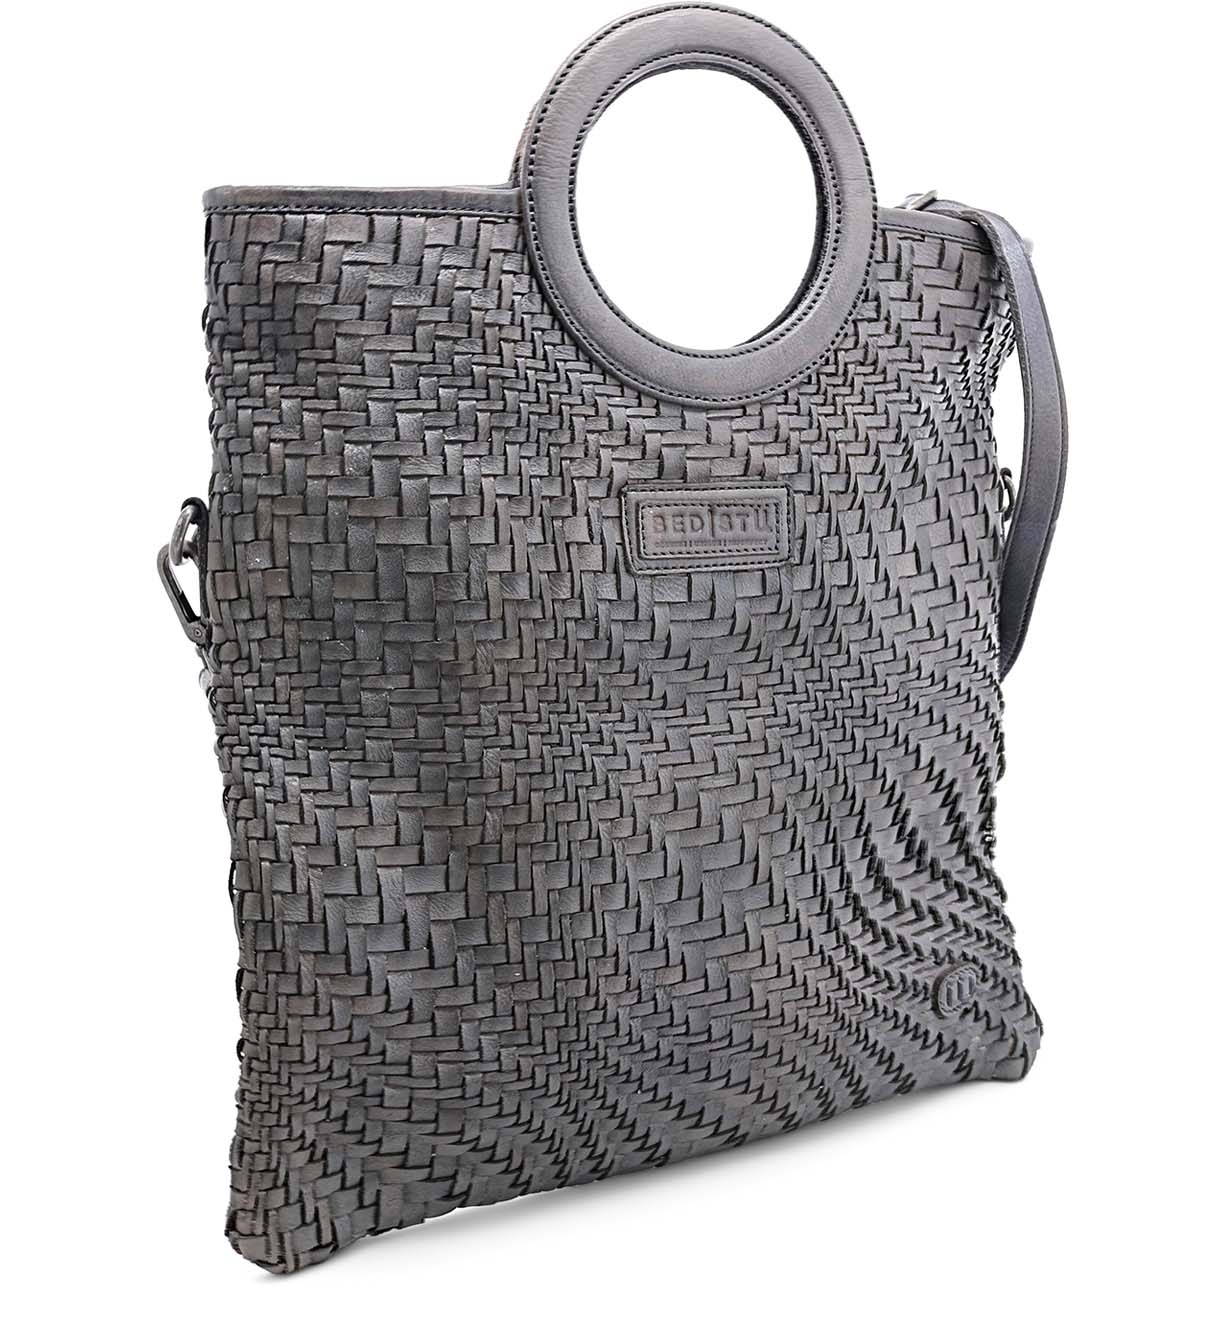 An Adele bag by Bed Stu, woven with a grey color and featuring a handle.